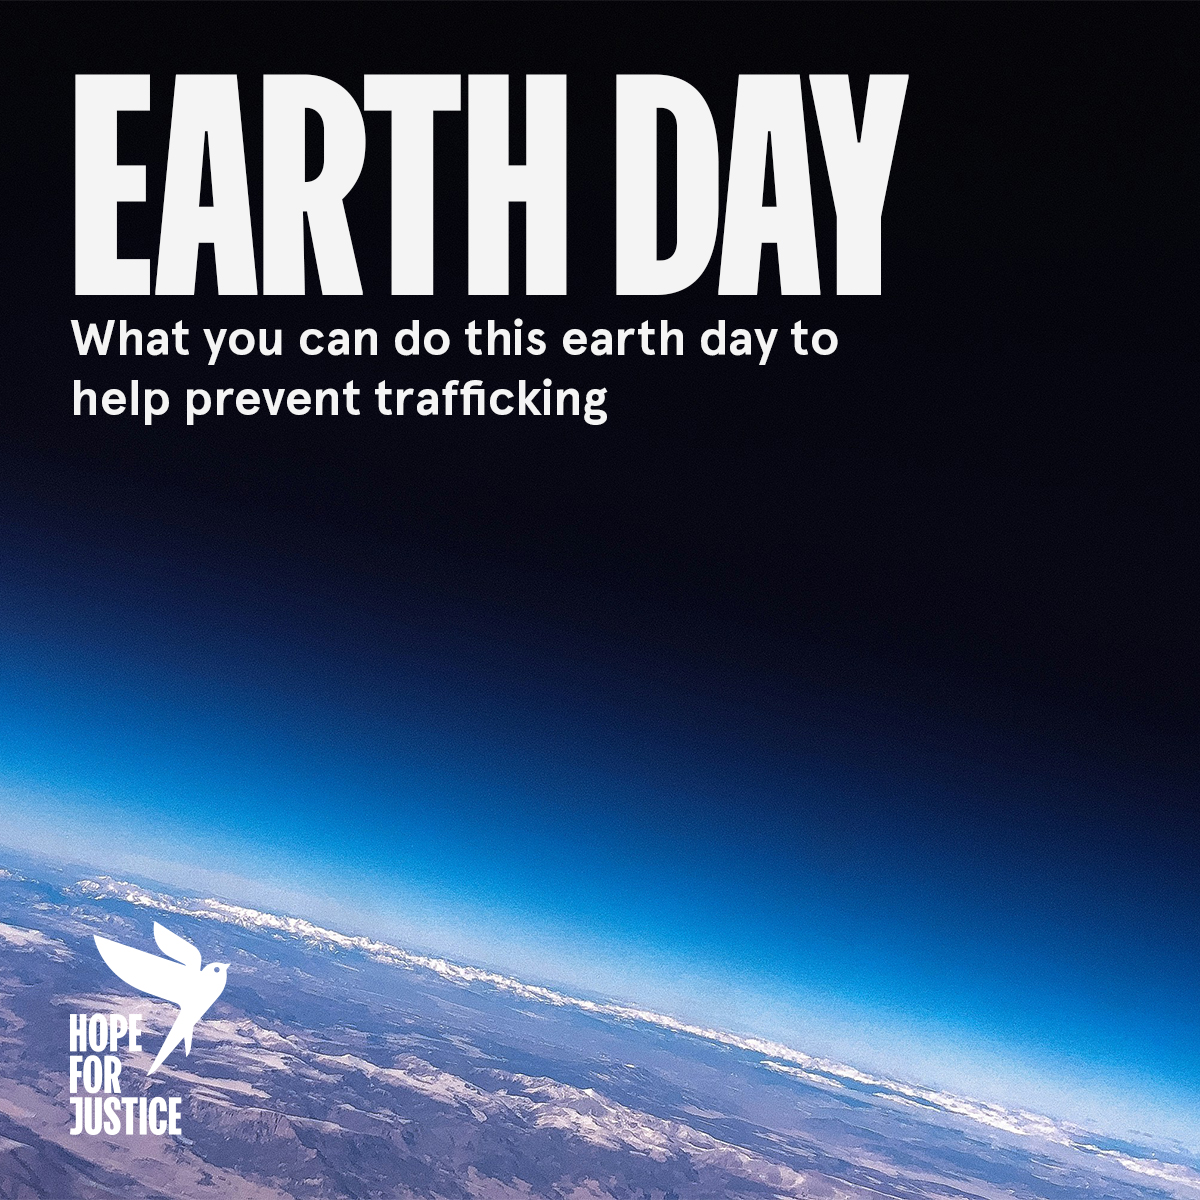 Today, April 22nd, is Earth Day. More and more studies are showing that modern slavery and climate change are inextricably linked. But what can you do this Earth Day to help prevent trafficking? Read here to learn more: hopeforjustice.org/news/what-can-…